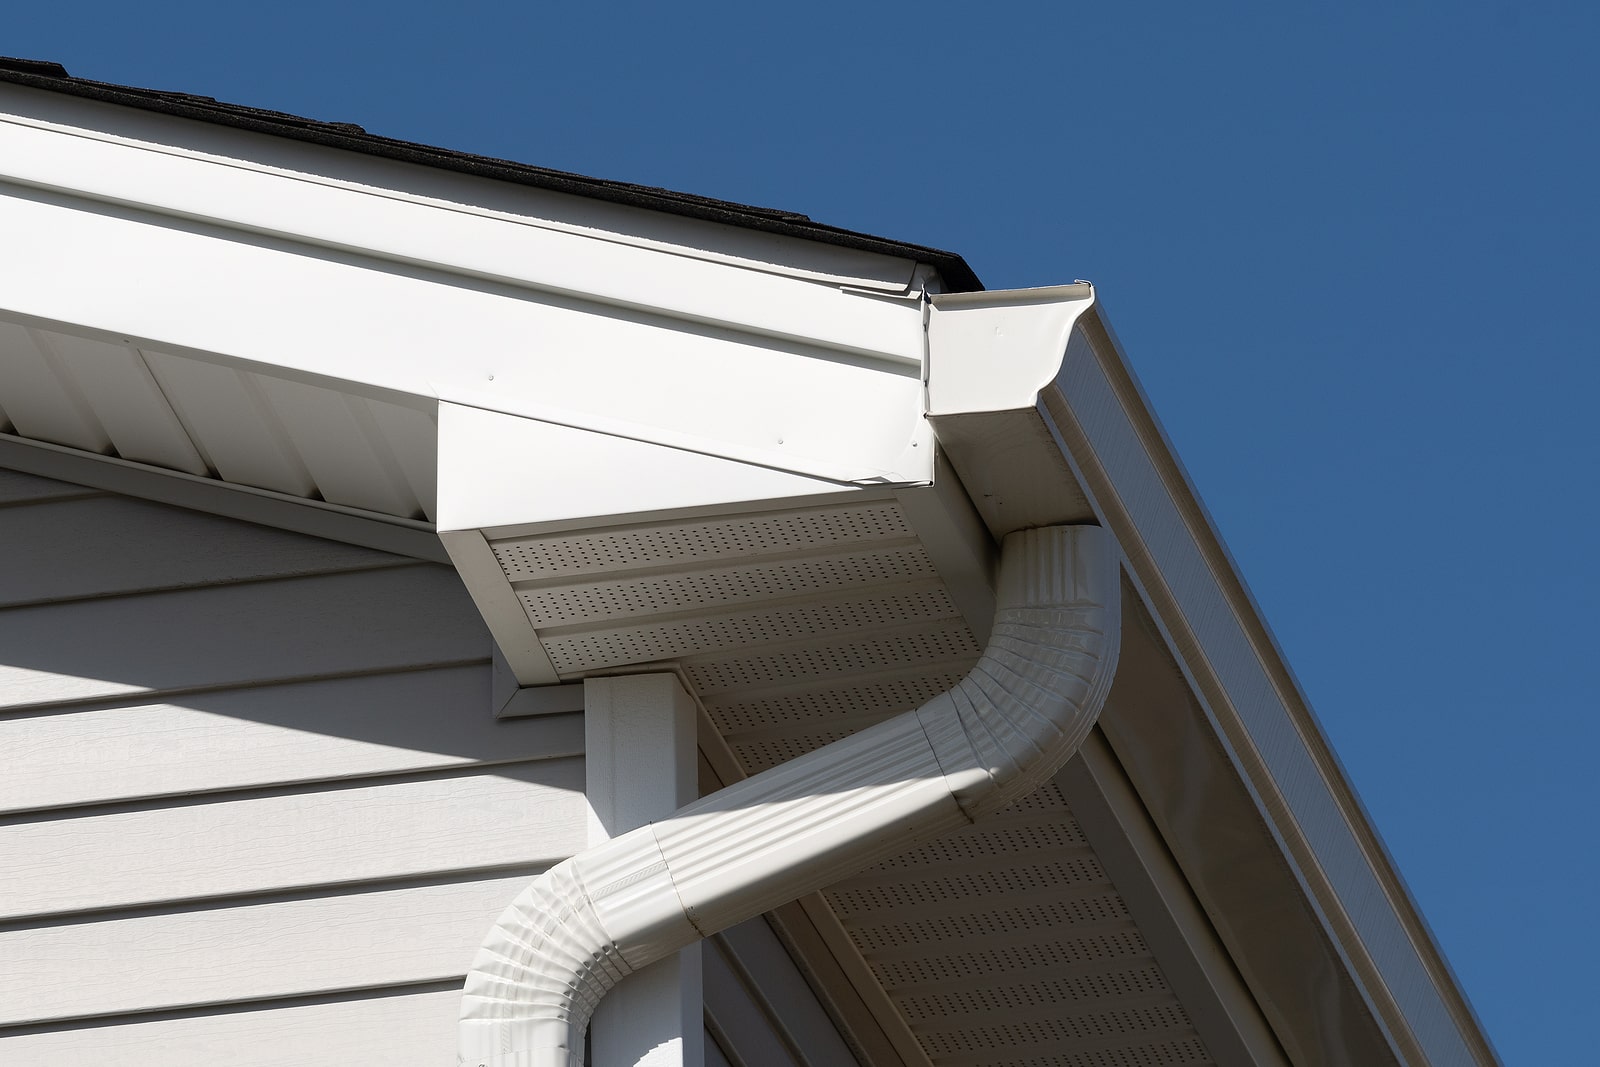 Siding and Gutter Replacement in Monroe, GA